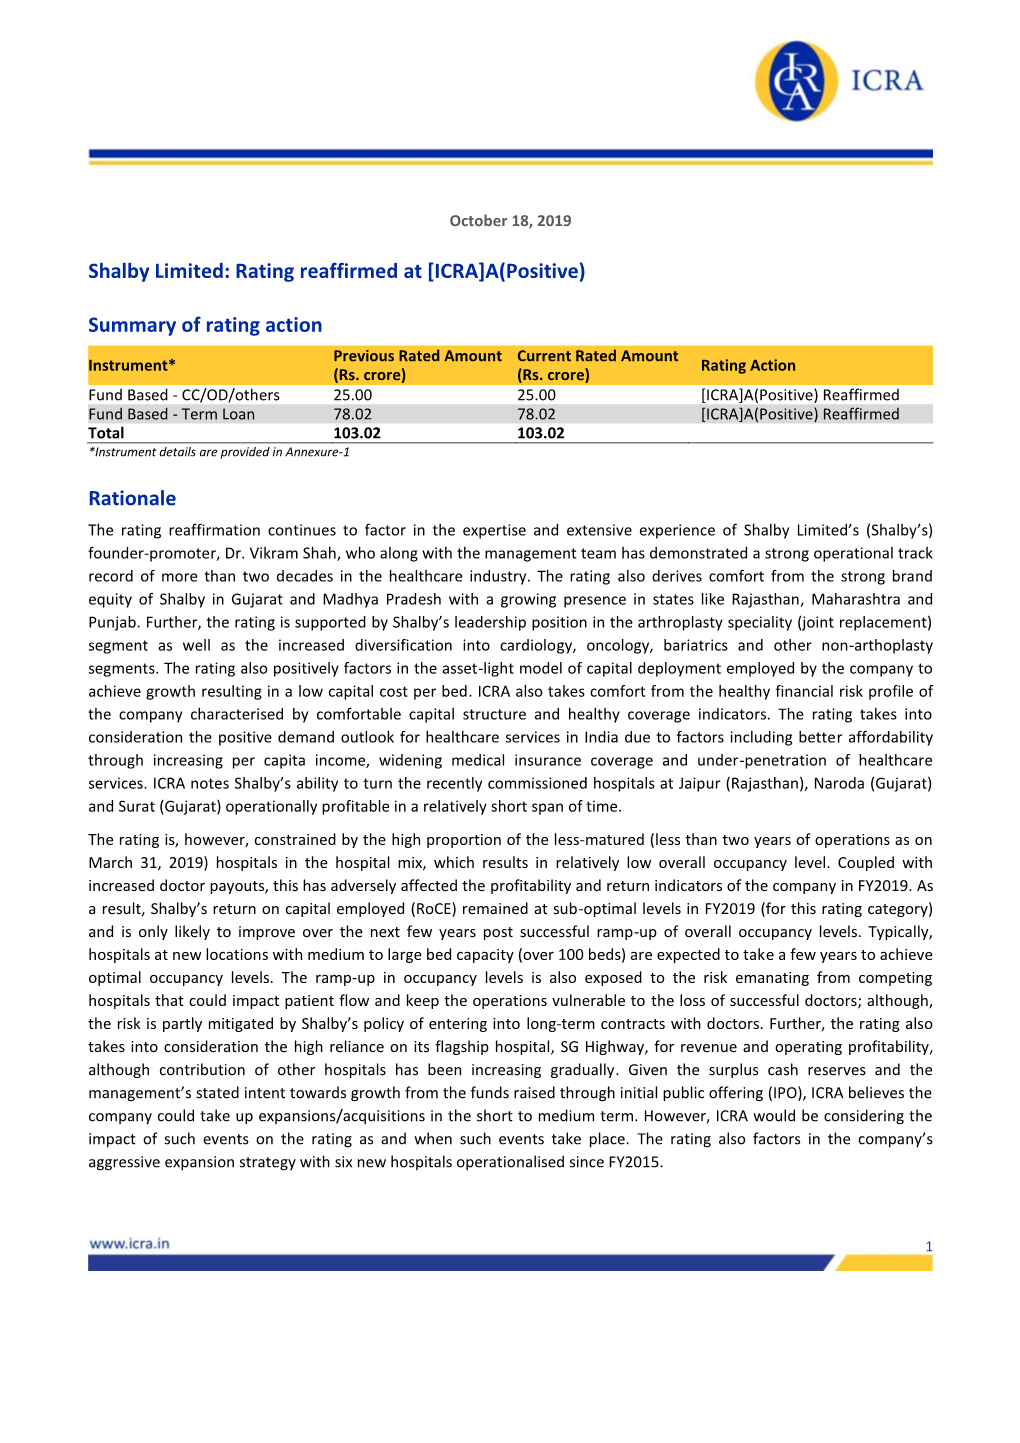 Shalby Limited: Rating Reaffirmed at [ICRA]A(Positive) Summary Of